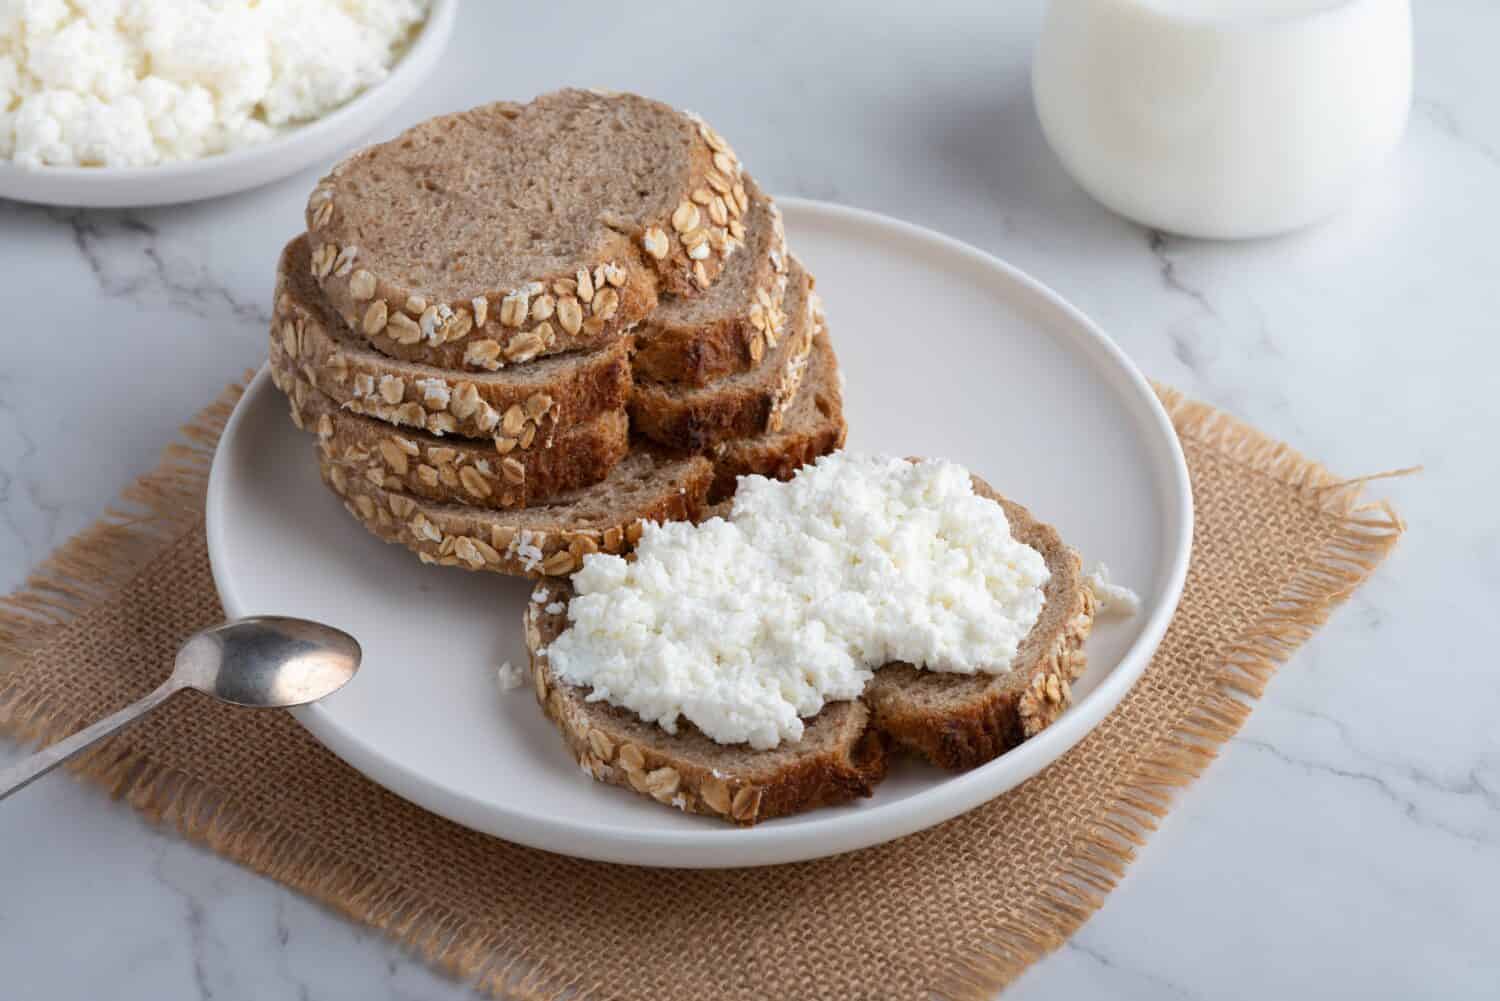 Creamy, delicious cottage cheese - the perfect snack for any time of day.